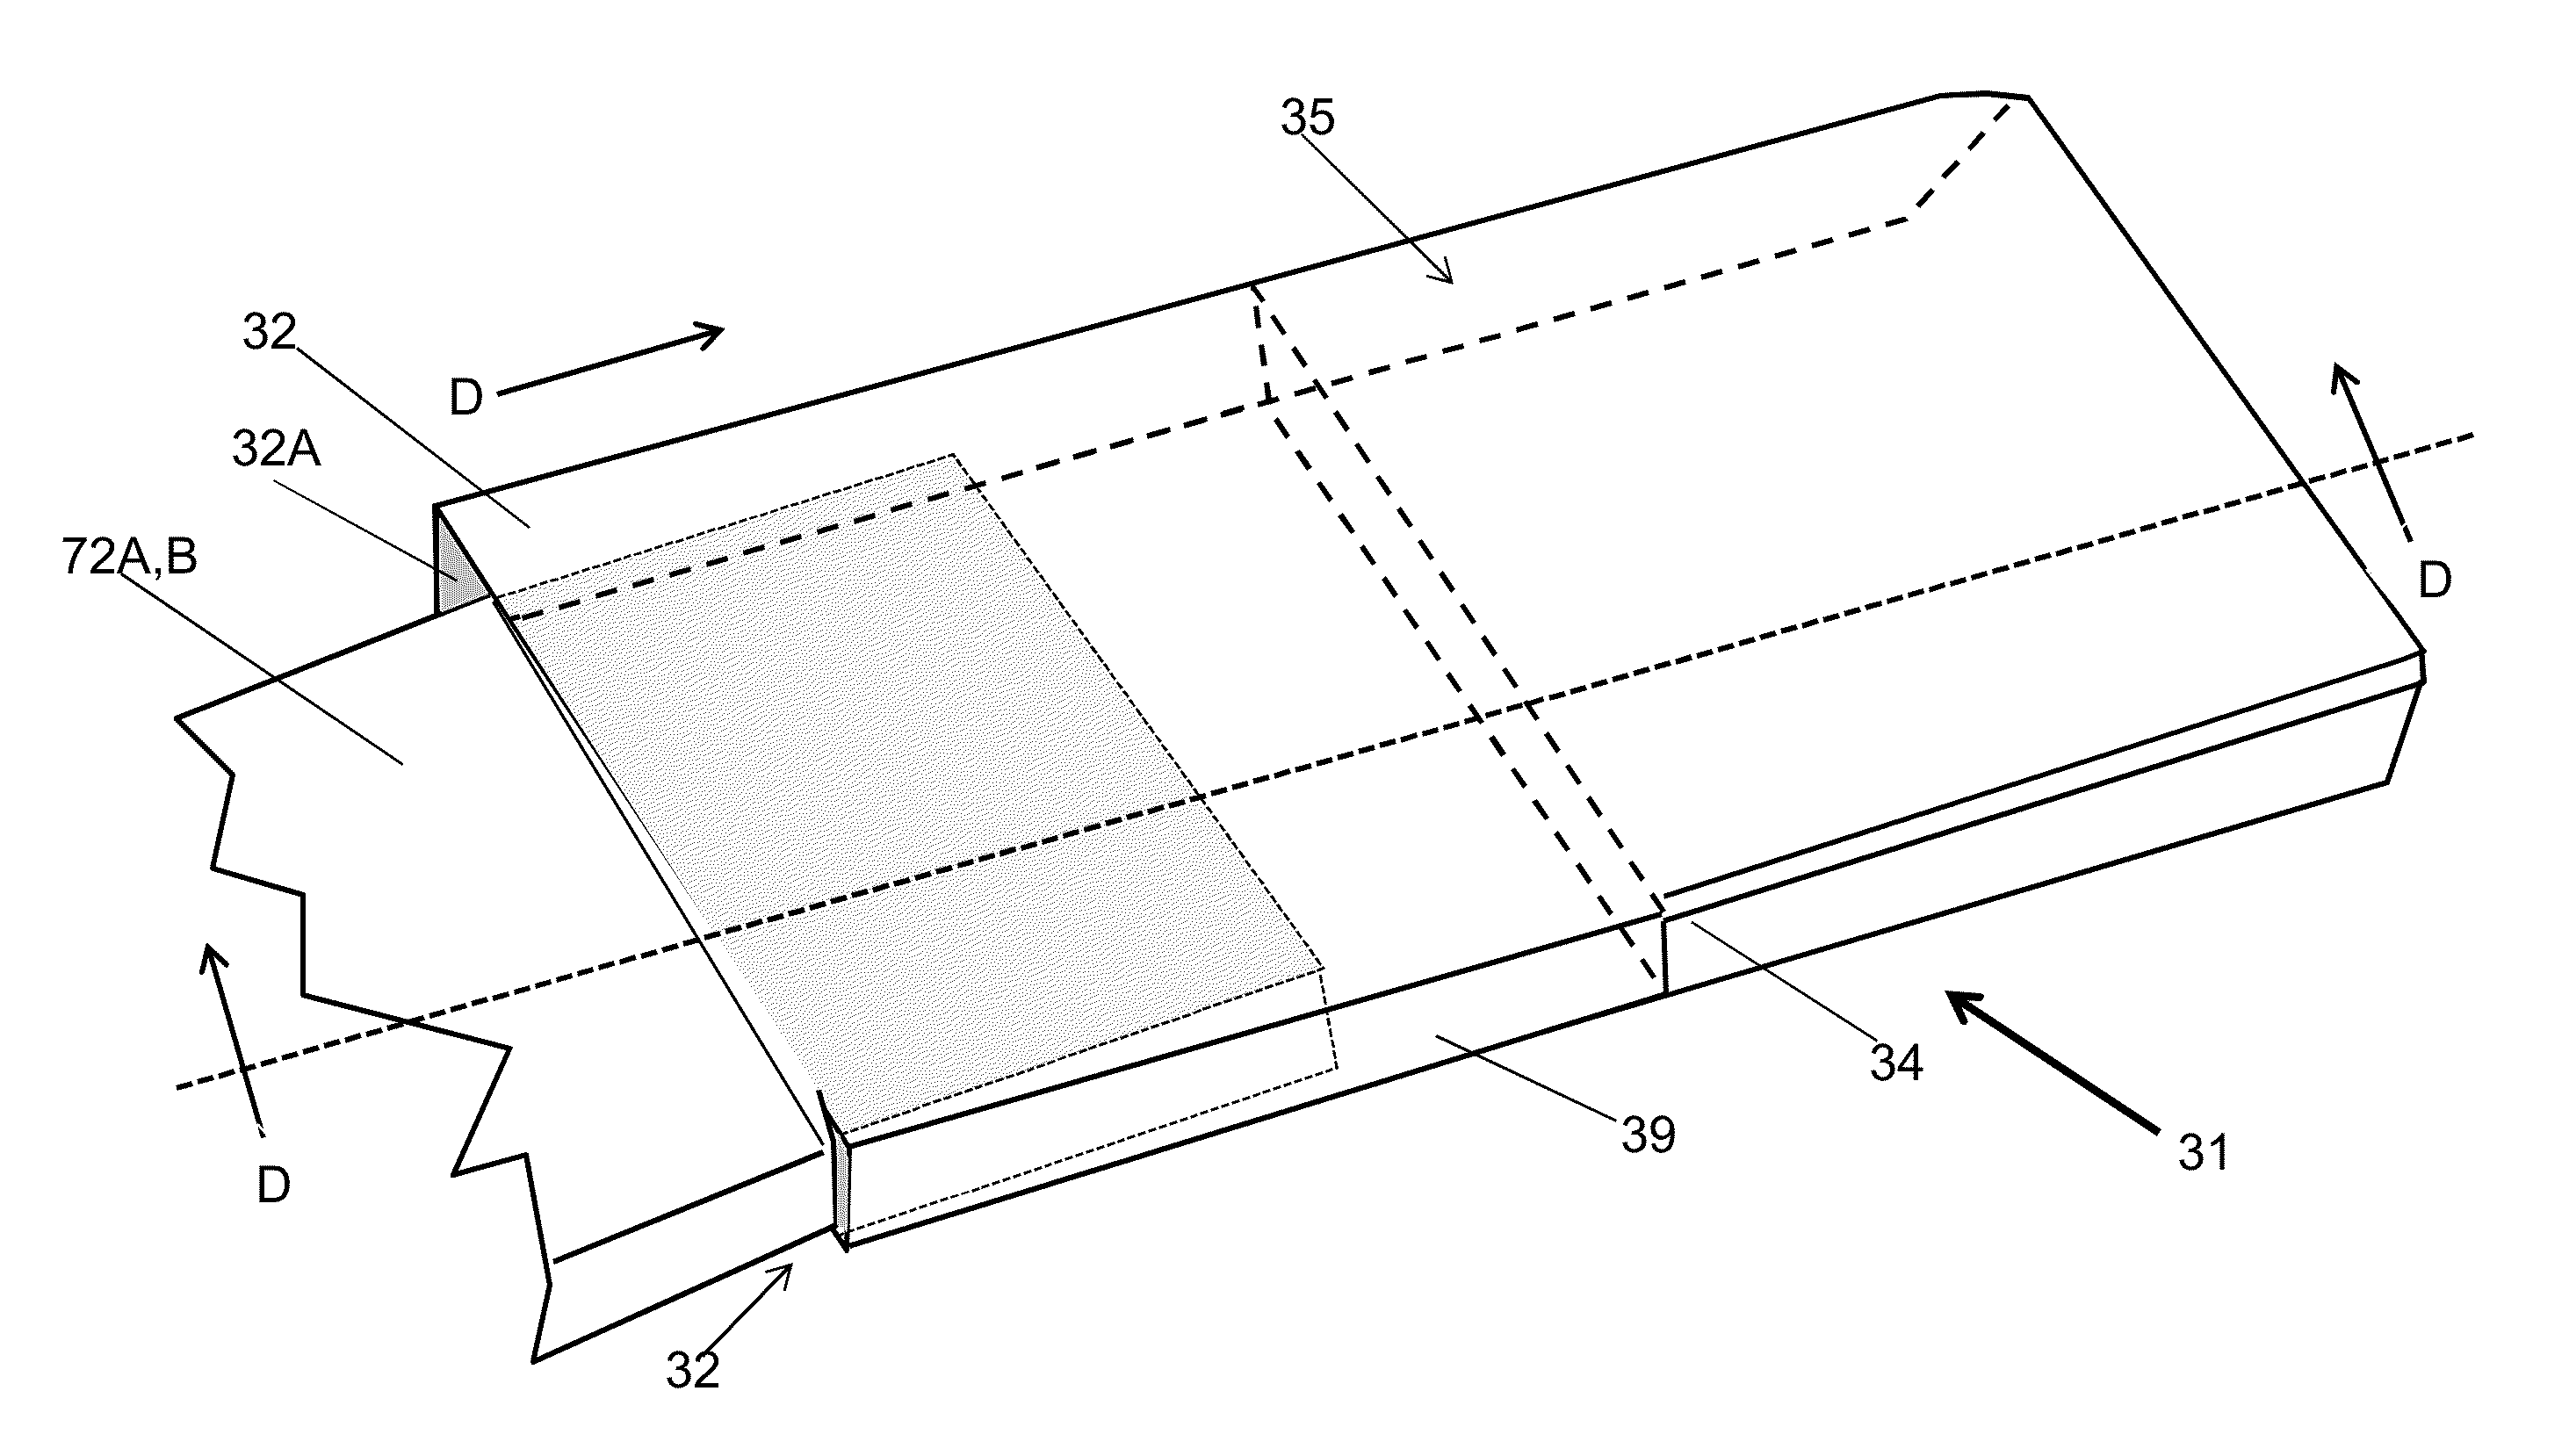 Extendable wheelchair device for supporting the feet of the user